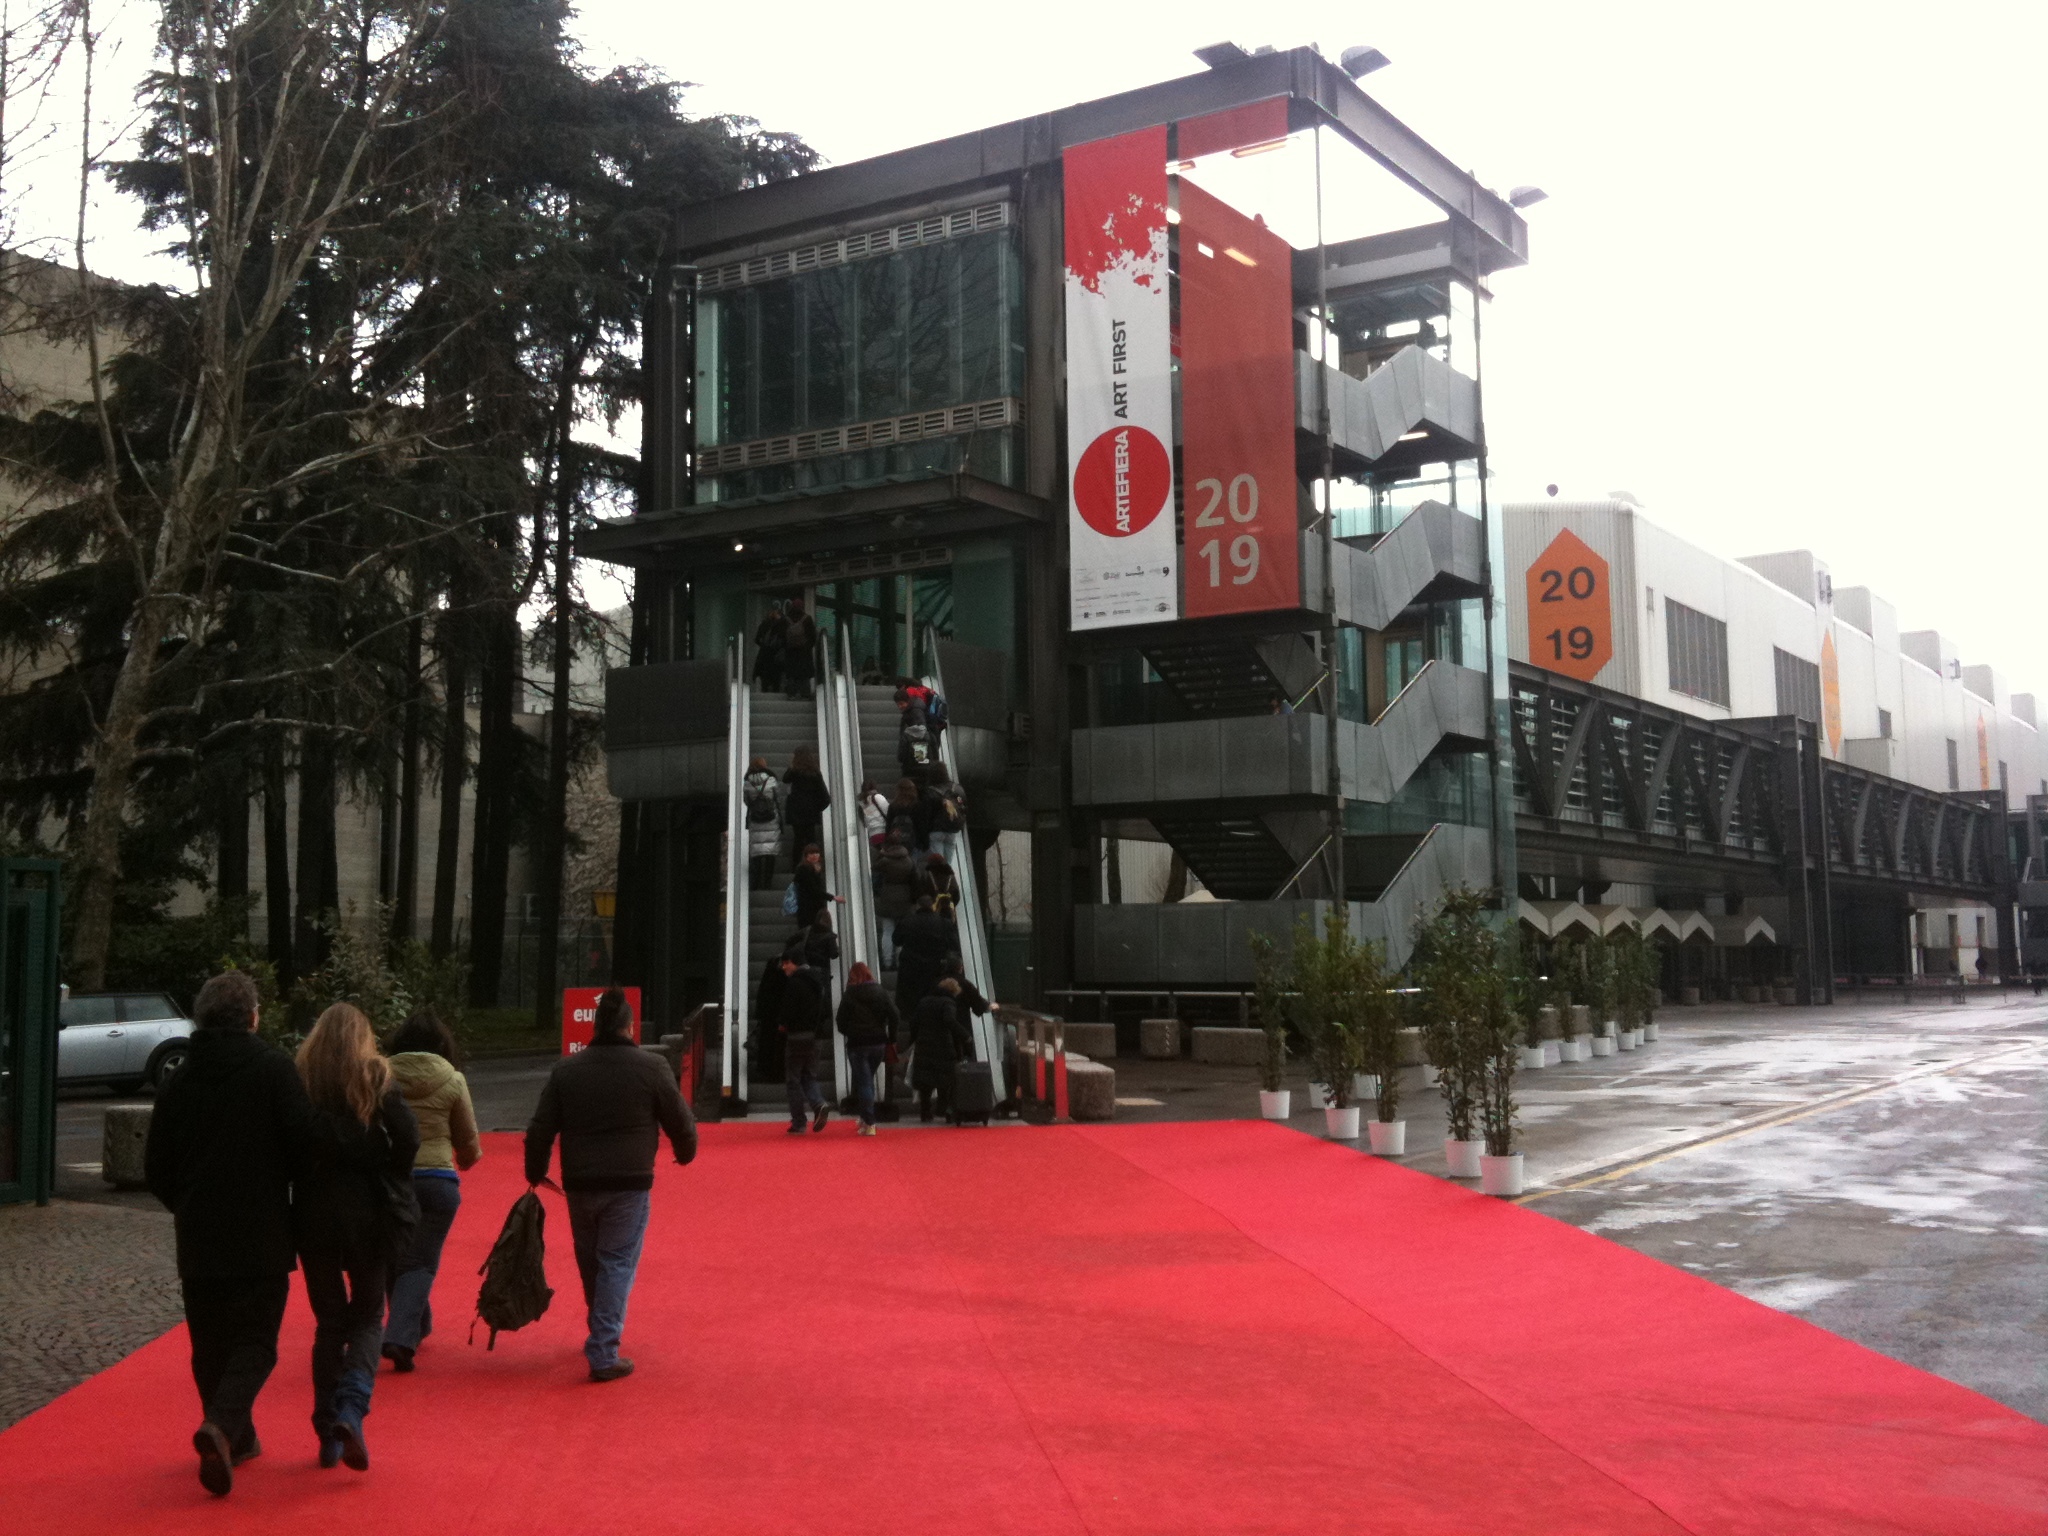 people walking down a red carpeted sidewalk by a building